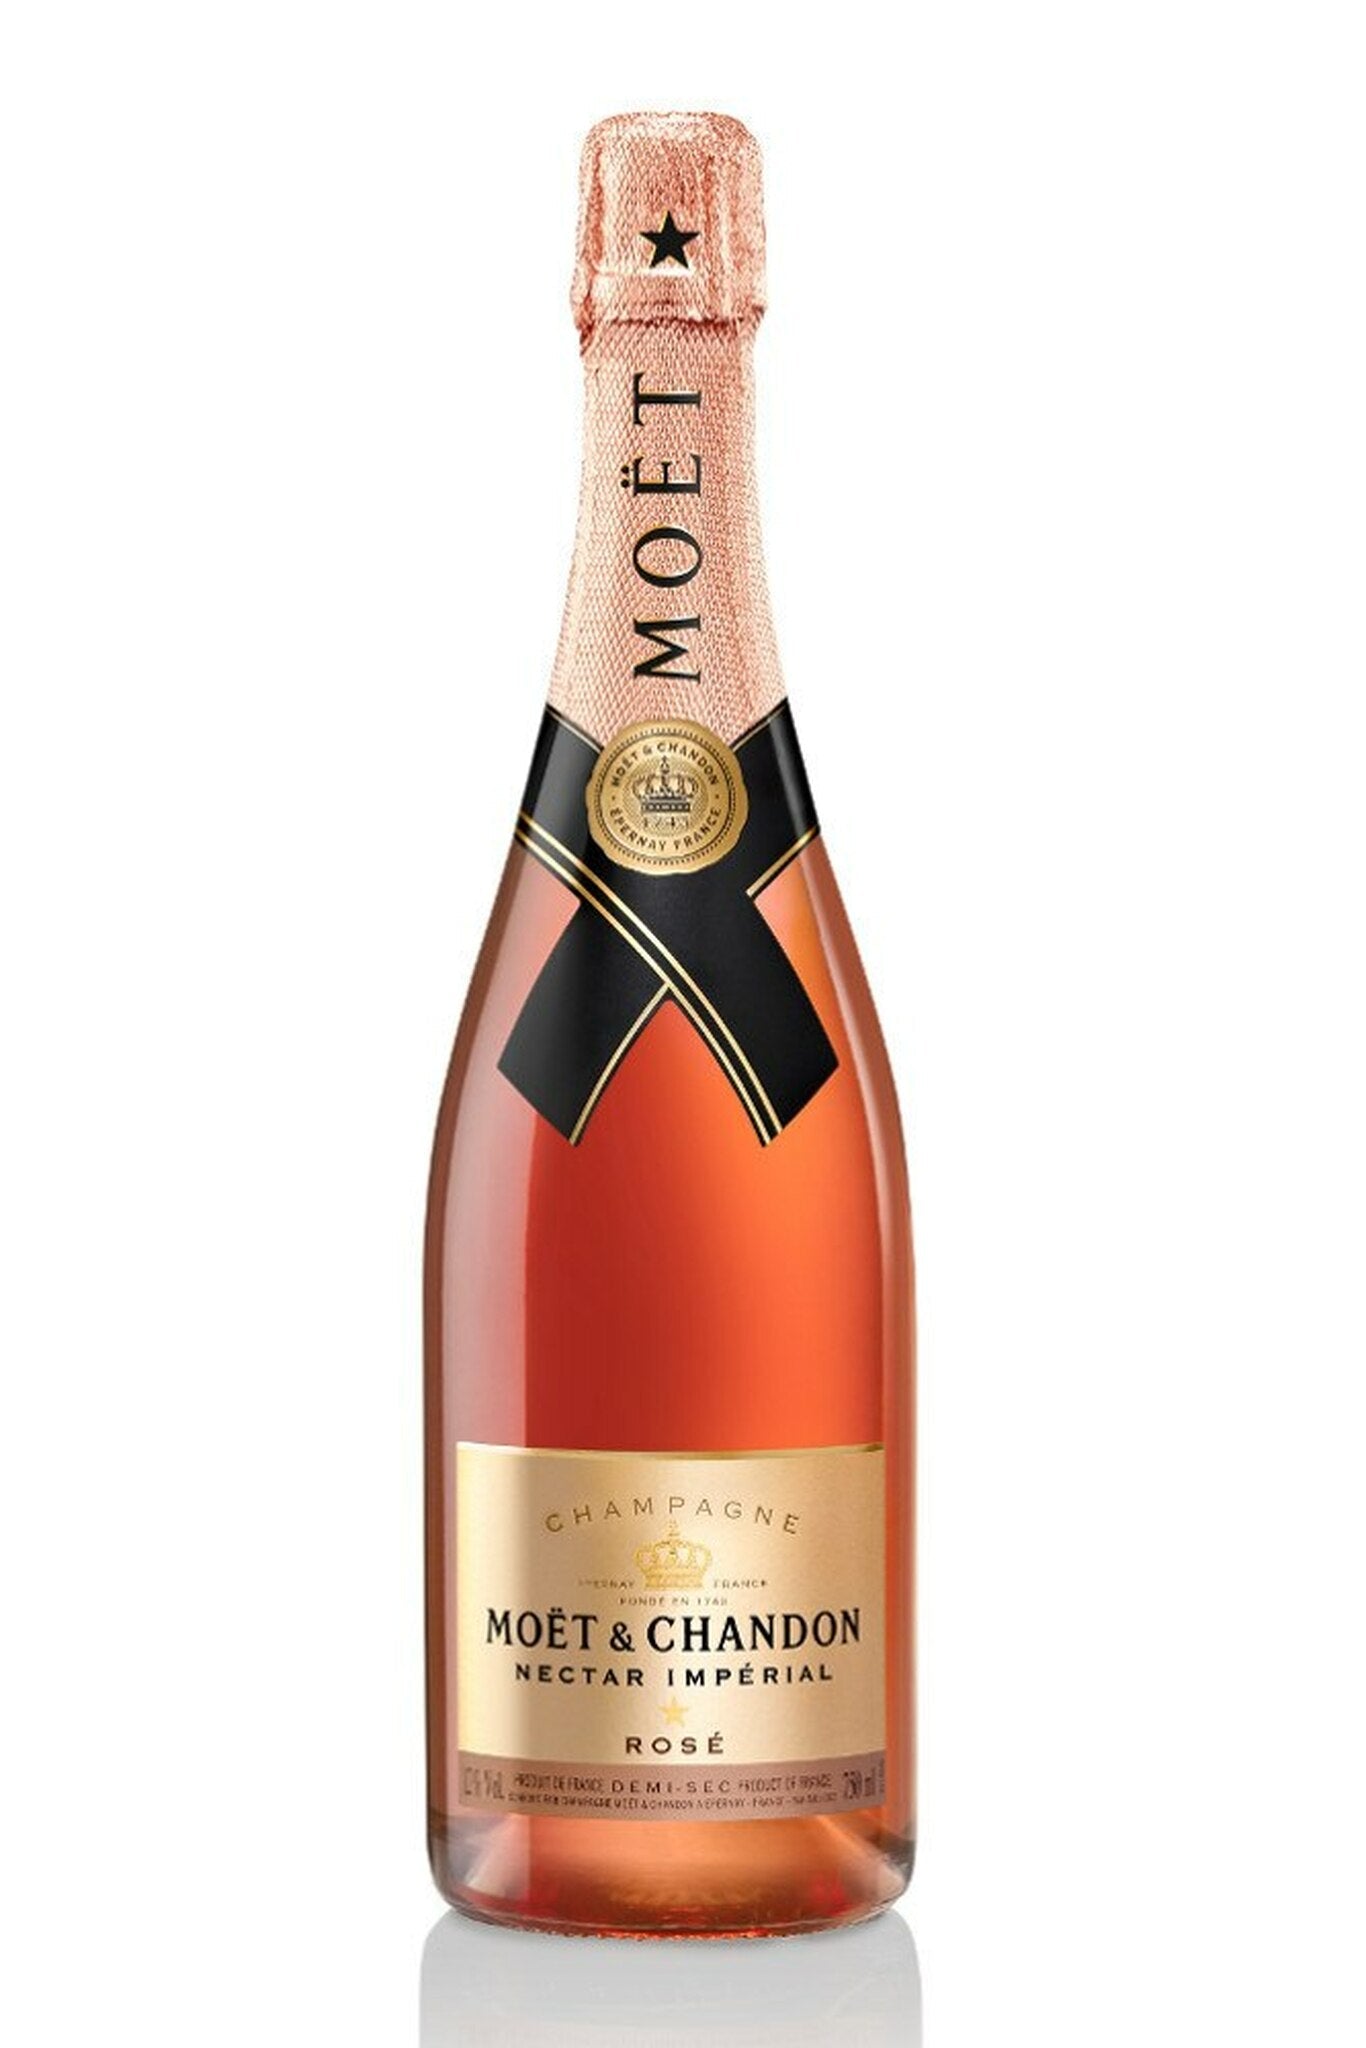 Moet & Chandon Champagne Brut Imperial - Find Rare Whiskey